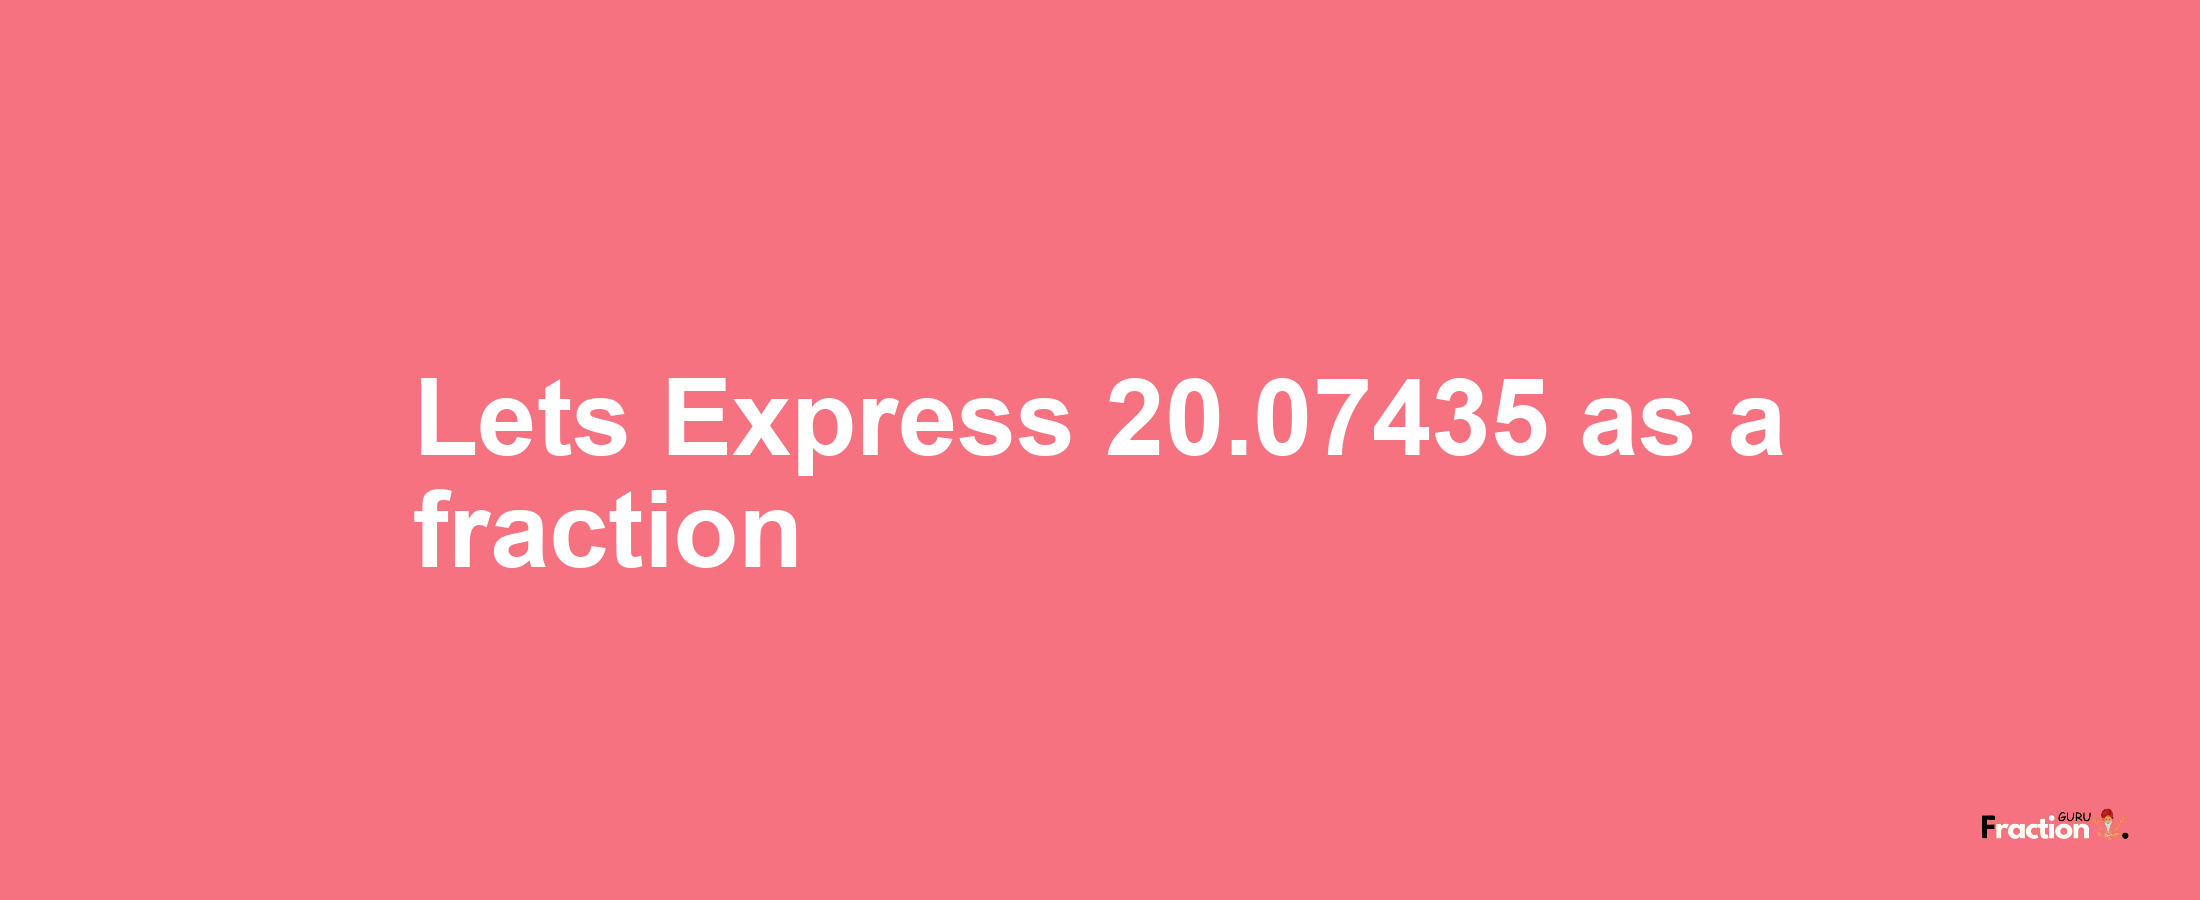 Lets Express 20.07435 as afraction